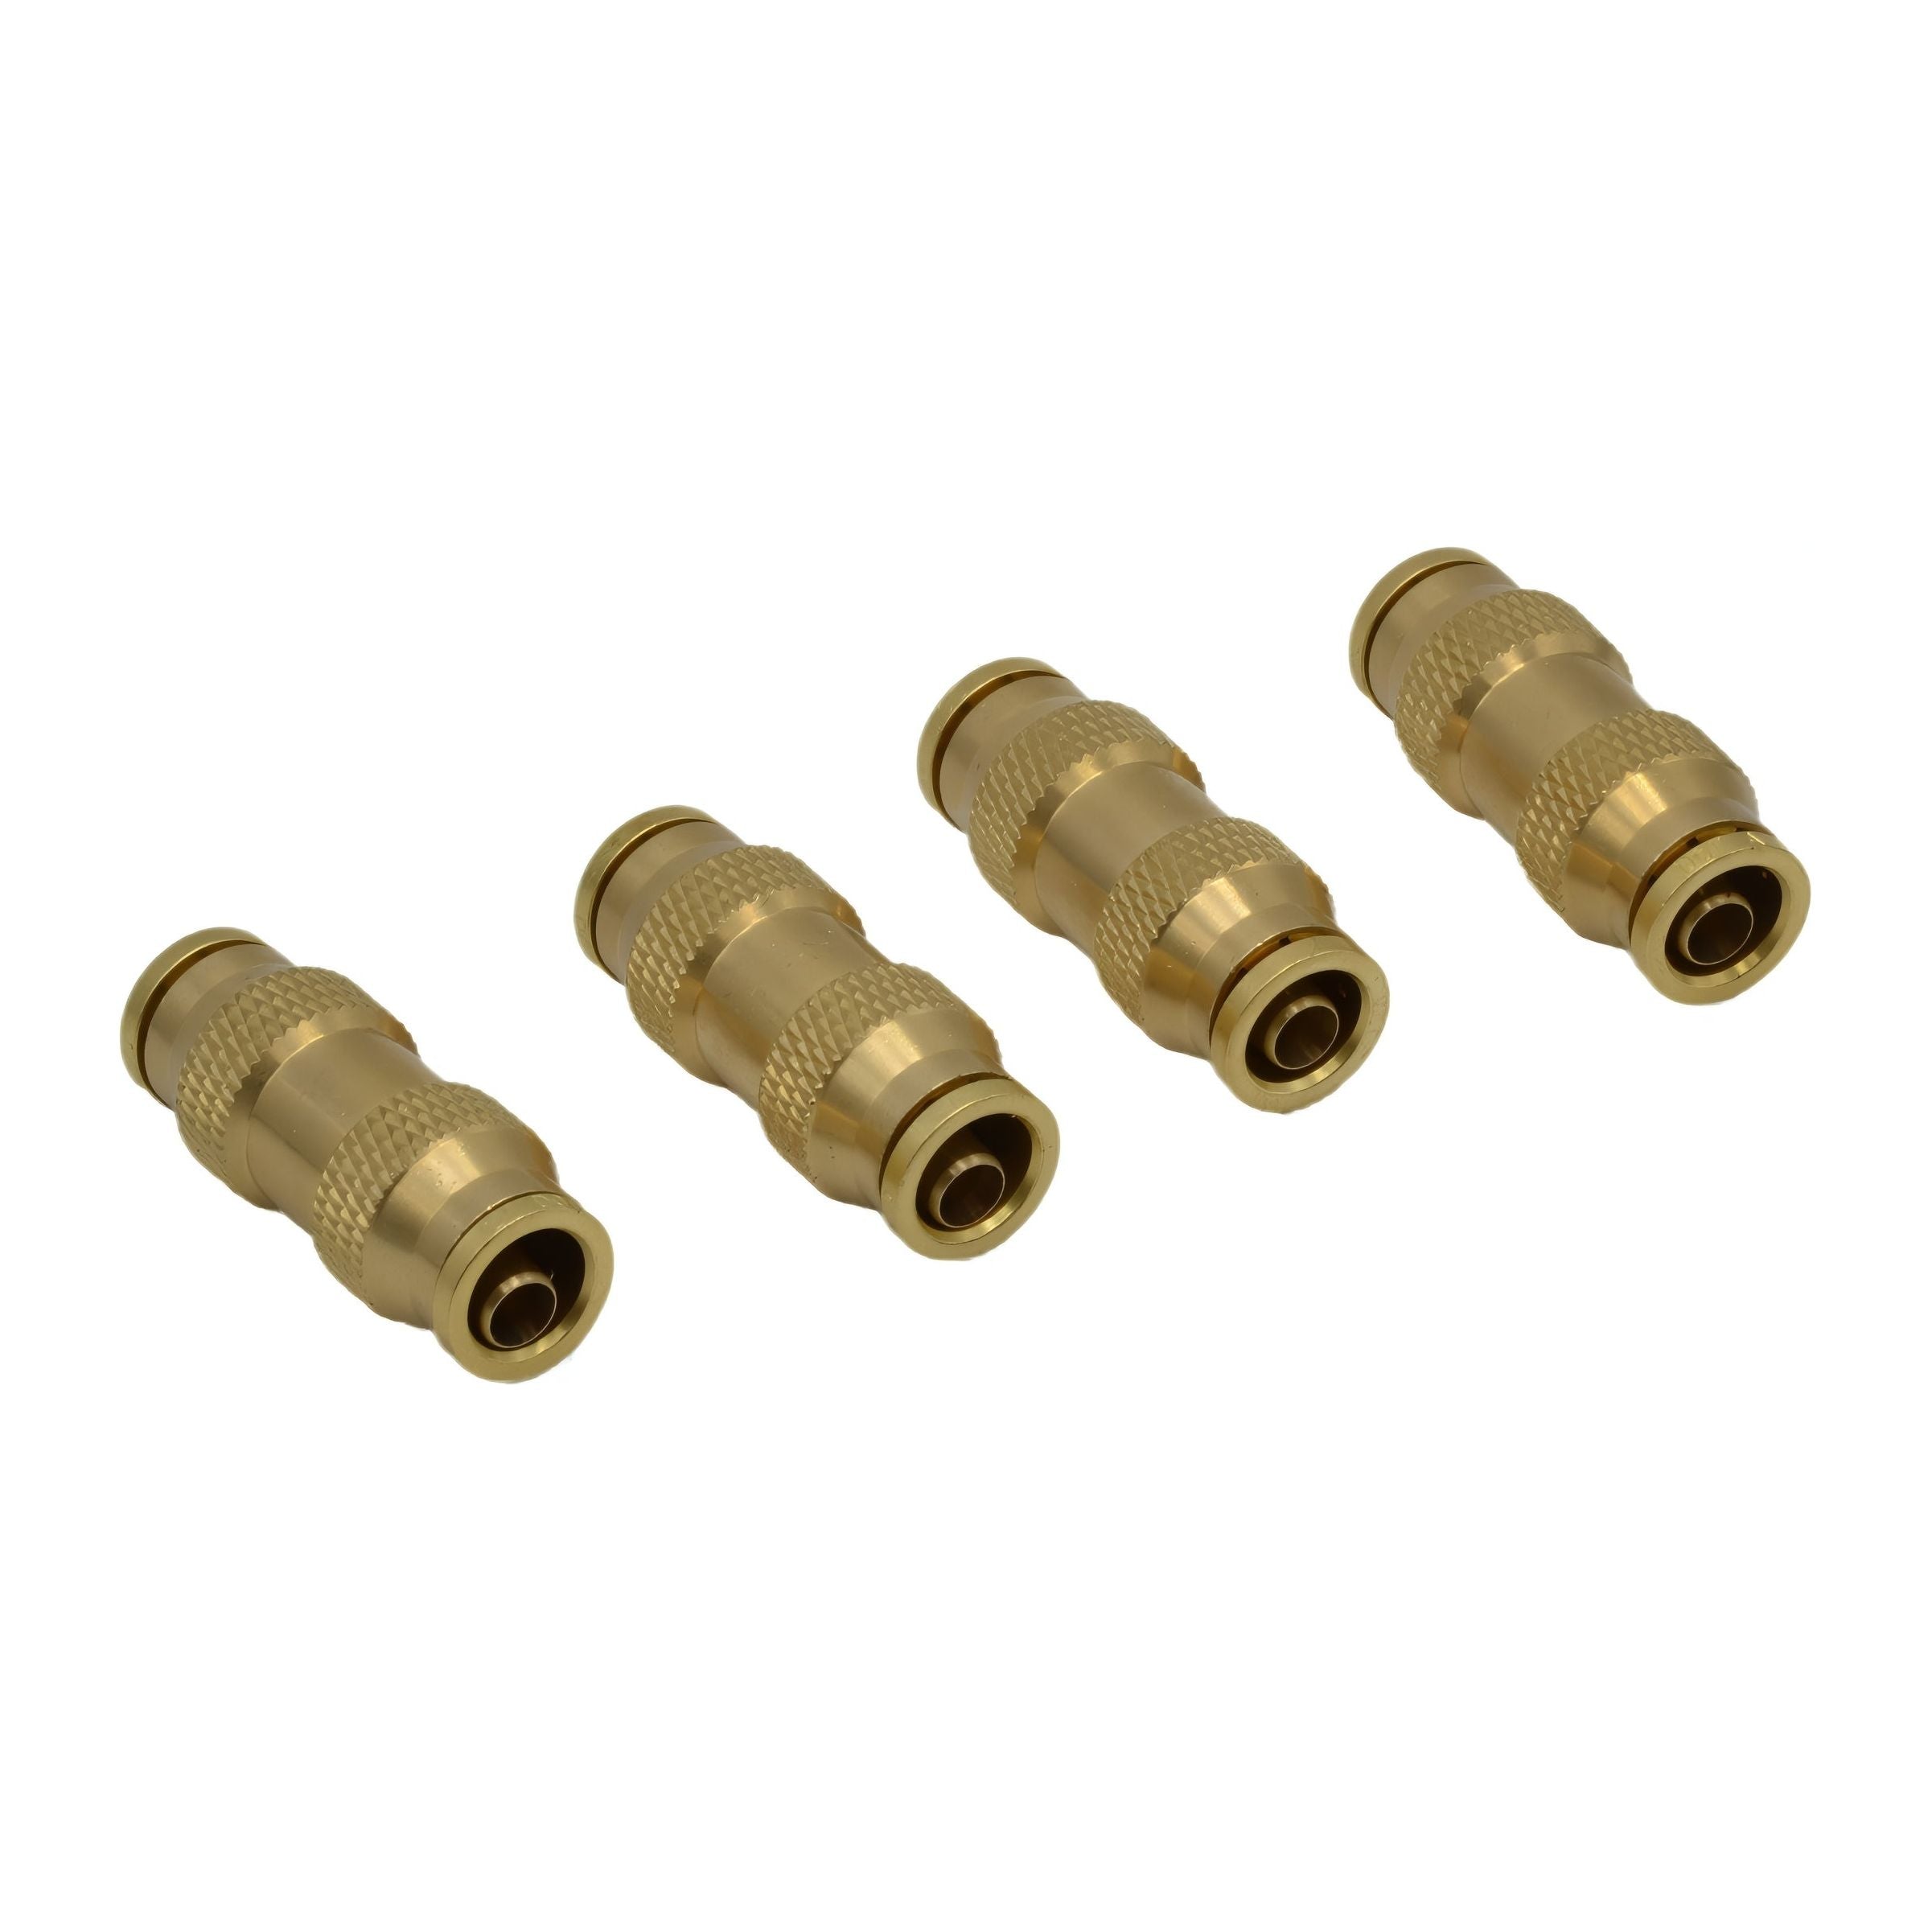 4 Piece 3/8 DOT Straight Brass Push in Hose Connect Grab Kit Assortment